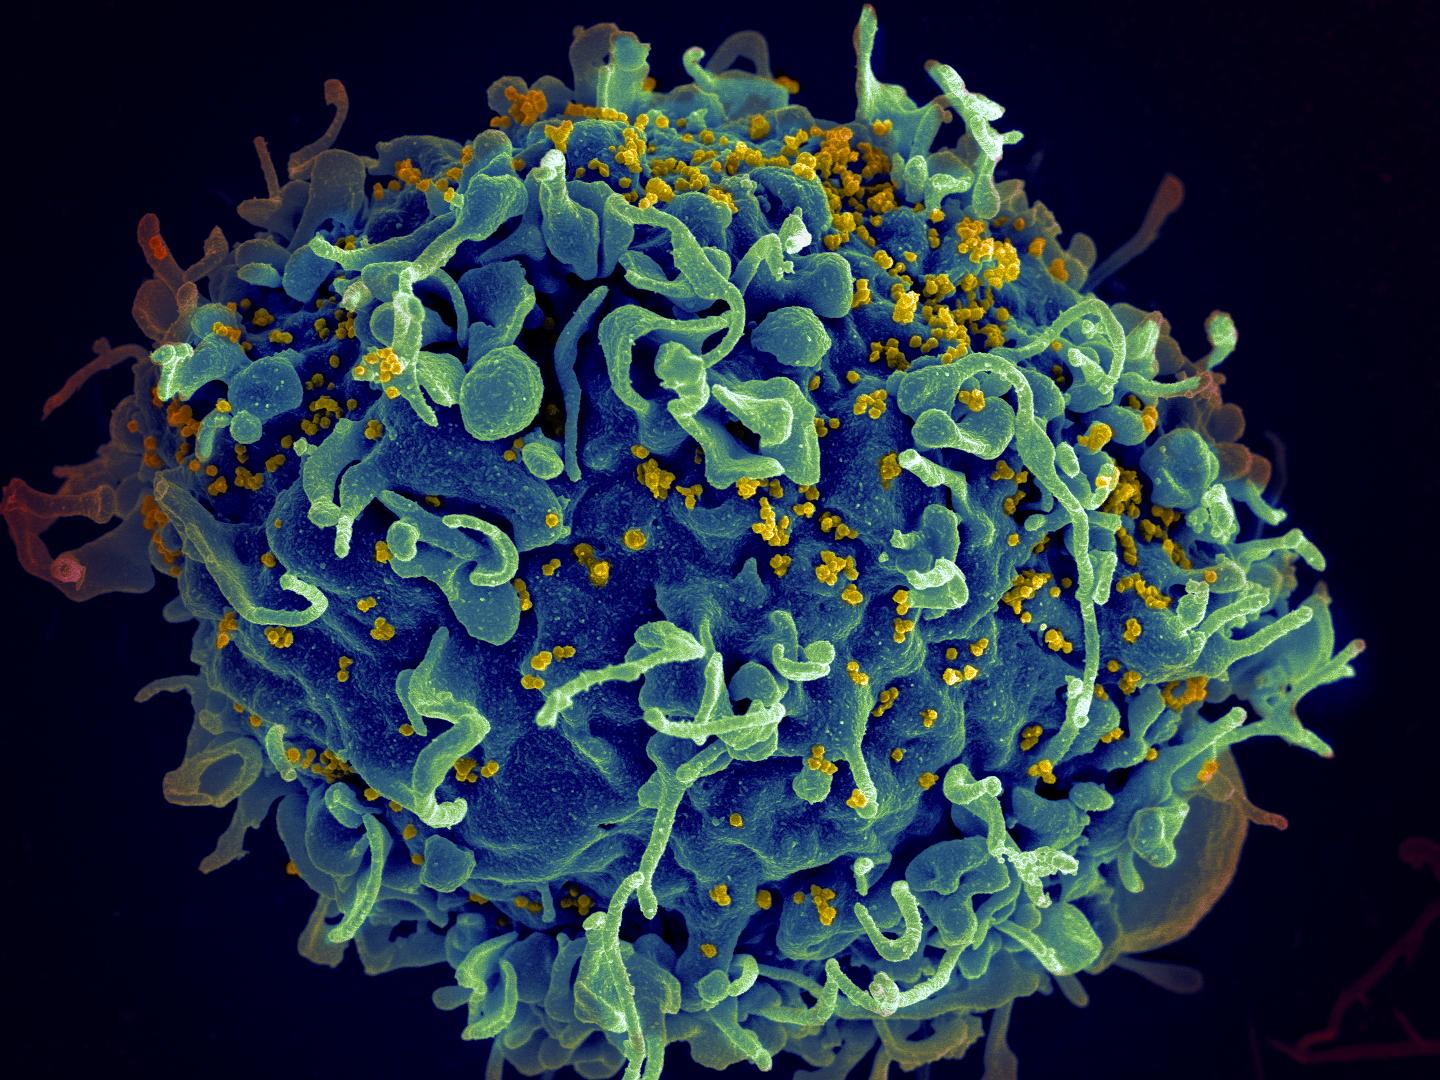 HIV, the AIDS virus, infecting a human cell